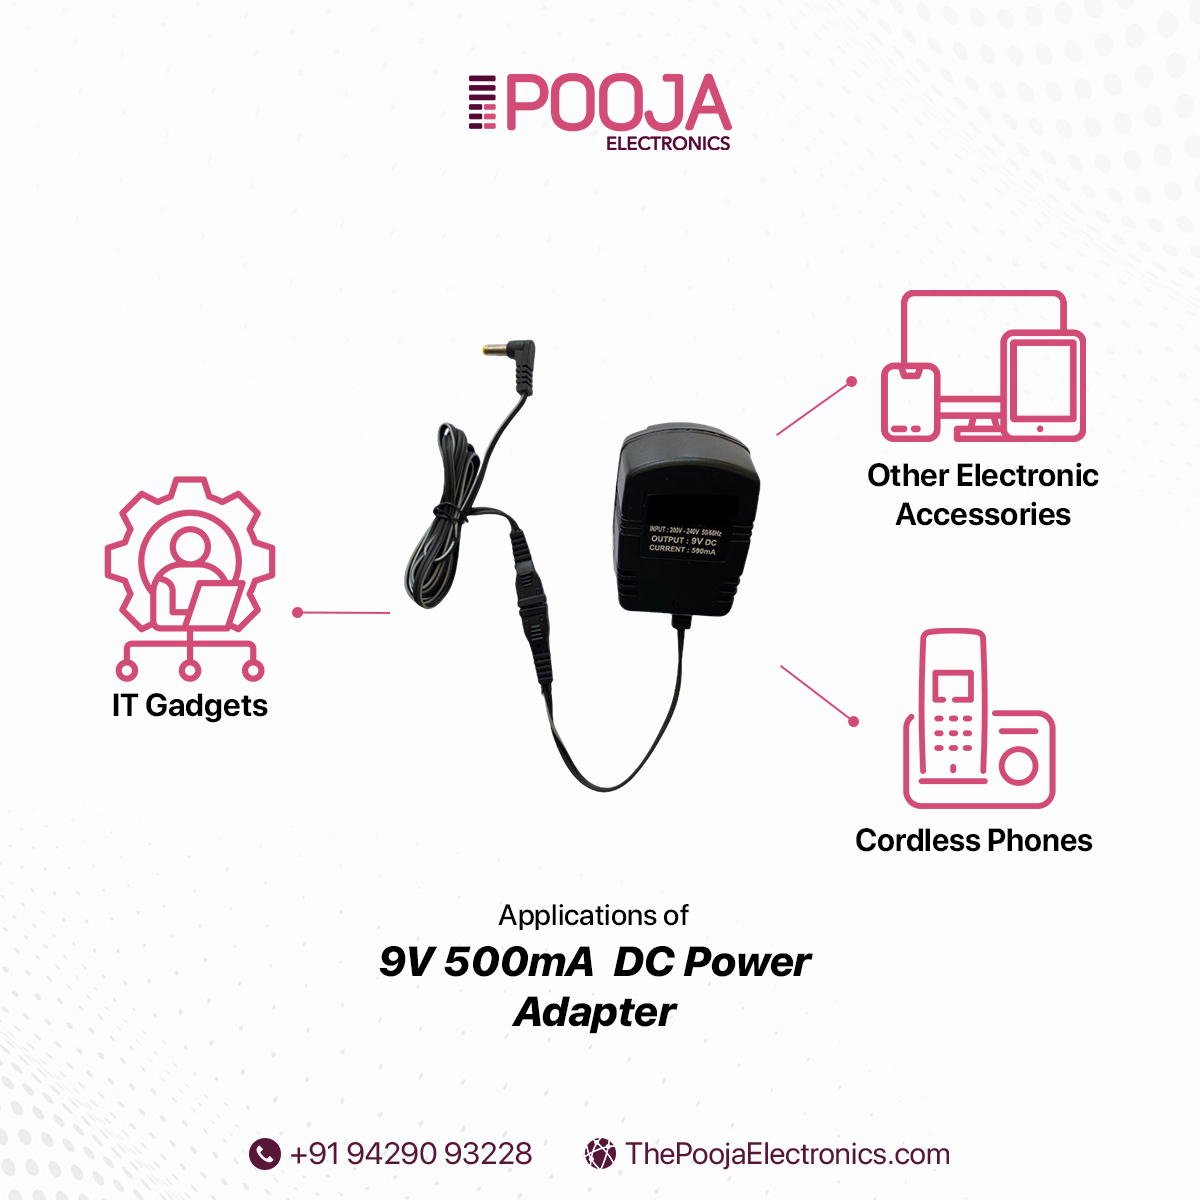 Reliability meets efficiency with our 9V 500mA DC Power Adapter from Pooja Electronics. Trust in quality, trust in performance.
.
#poojaelectronics #ContinuousPower #FastCharging #ReliableCharging #FastCharge #acremote #caraudioremote #SeamlessConnectivity #DigitalEntertainment